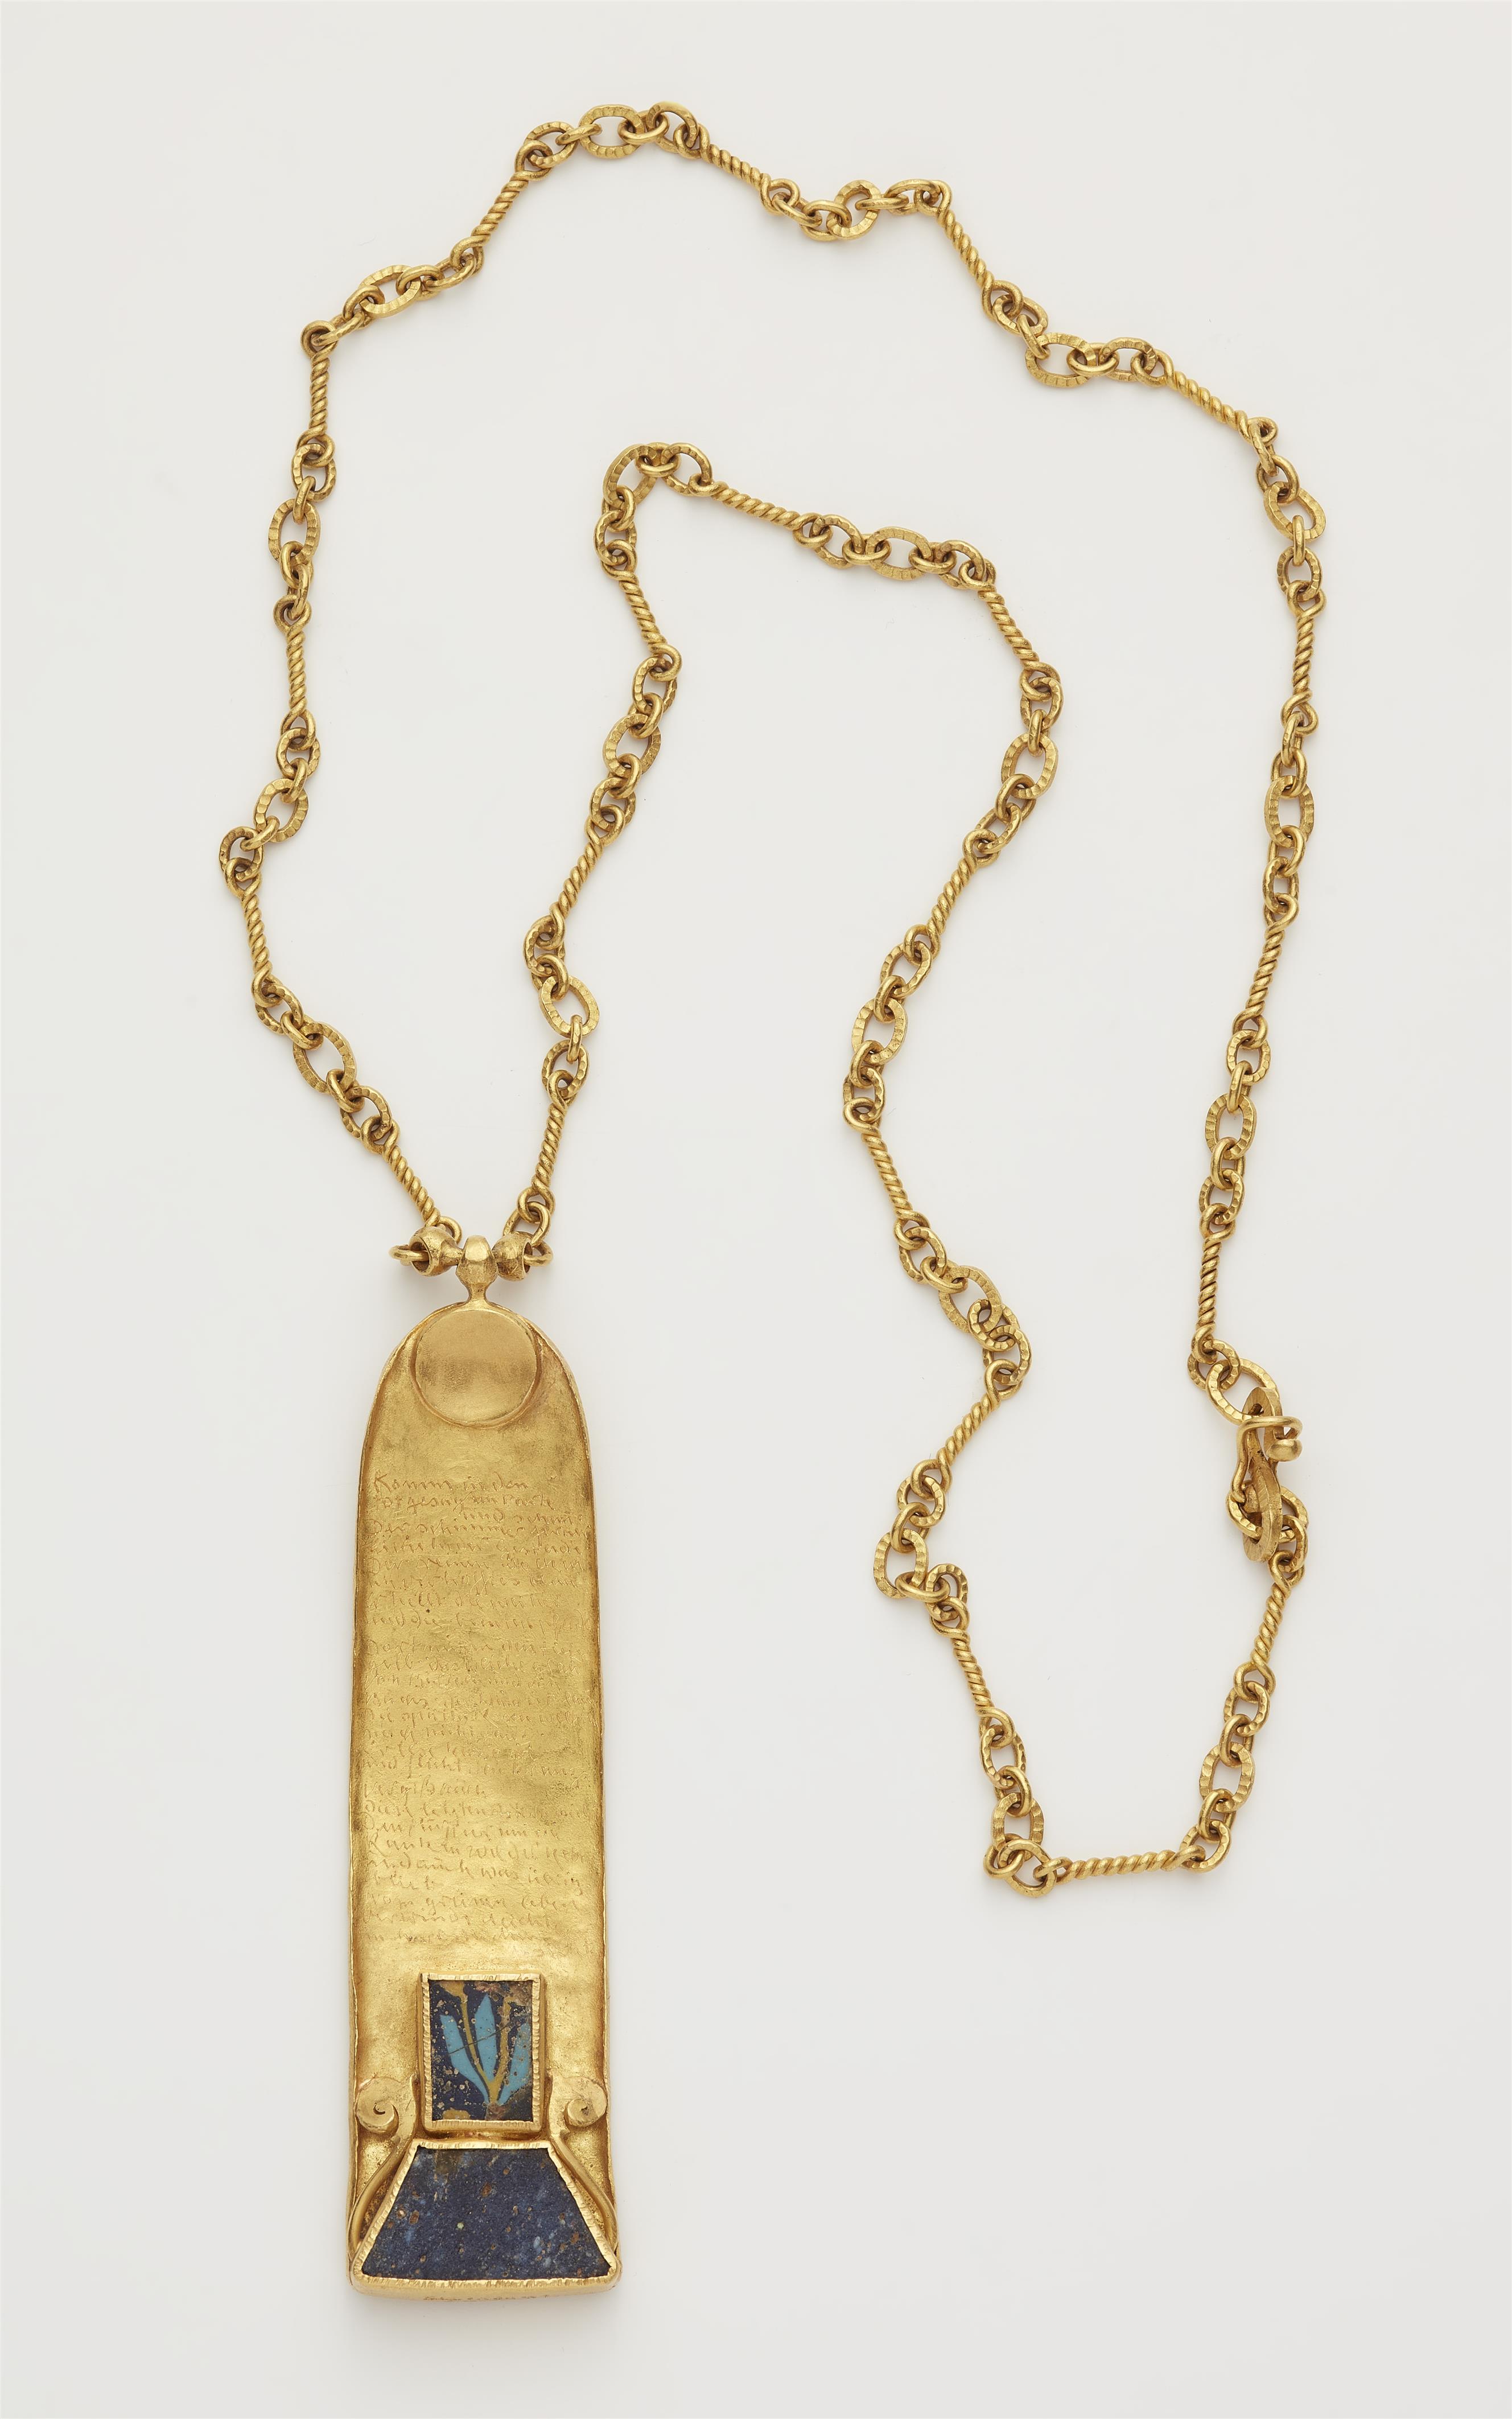 A German one of a kind 22k gold and ancient glass pendant necklace with engraved poem by Stefan George. - image-1